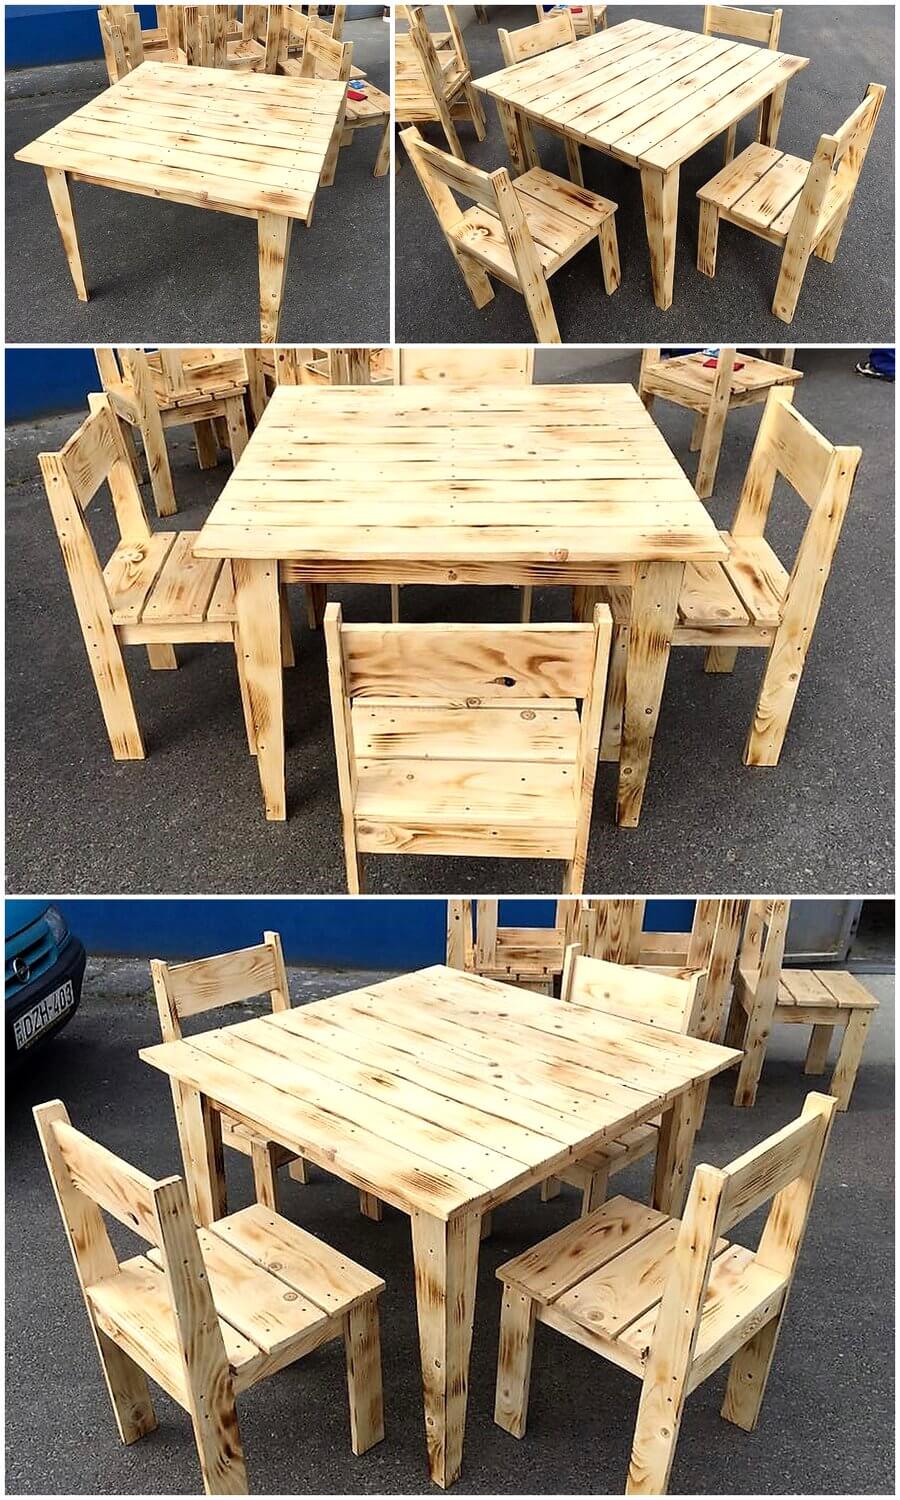 Simple Furniture Set Made with Pallets Wood | Wood Pallet ...